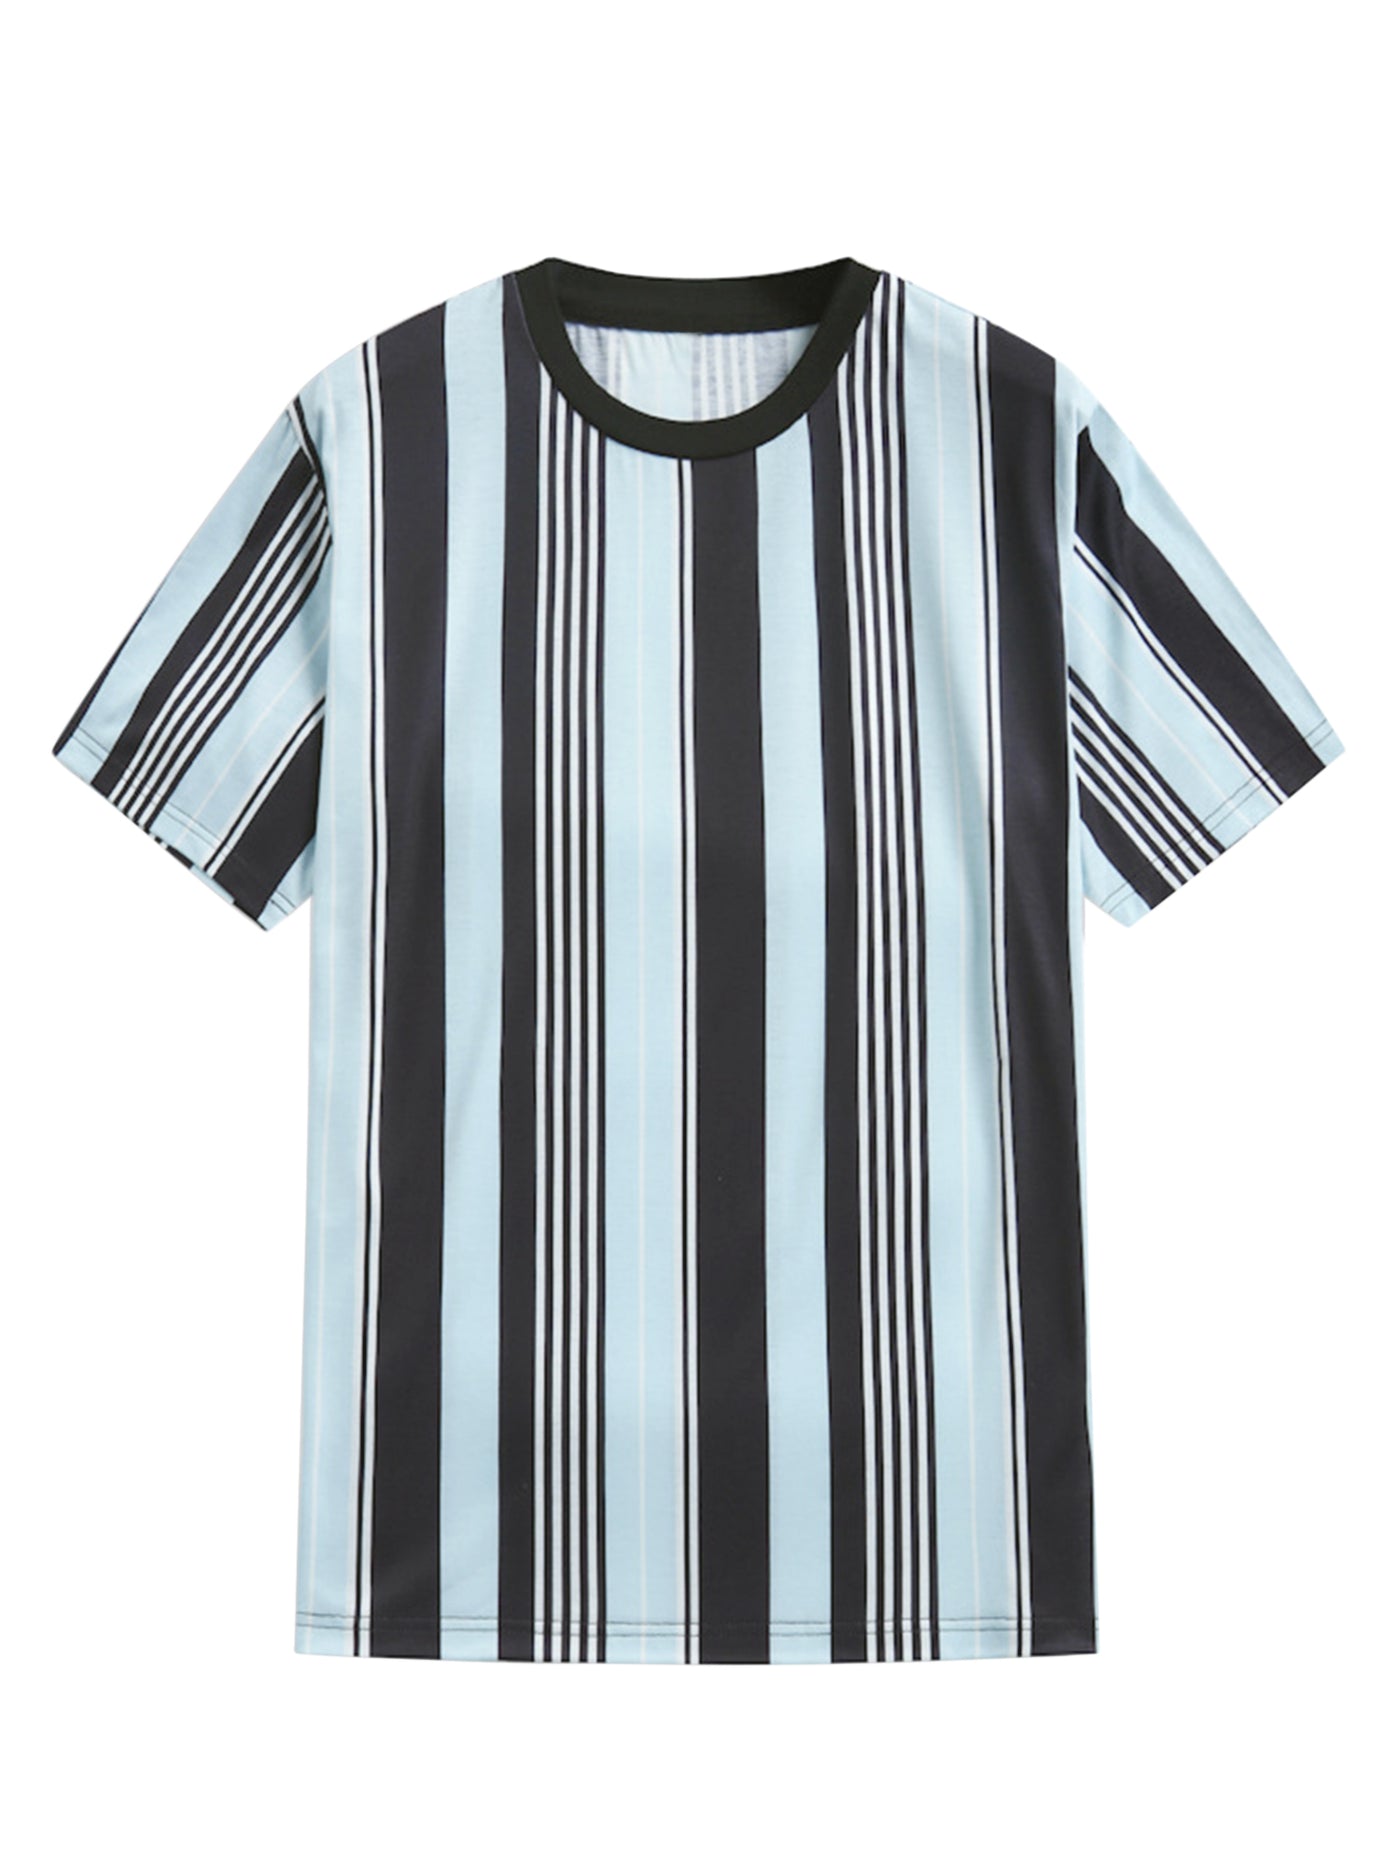 Bublédon Striped T-Shirt for Men's Summer Crew Neck Short Sleeves Stripes Printed Tee Tops